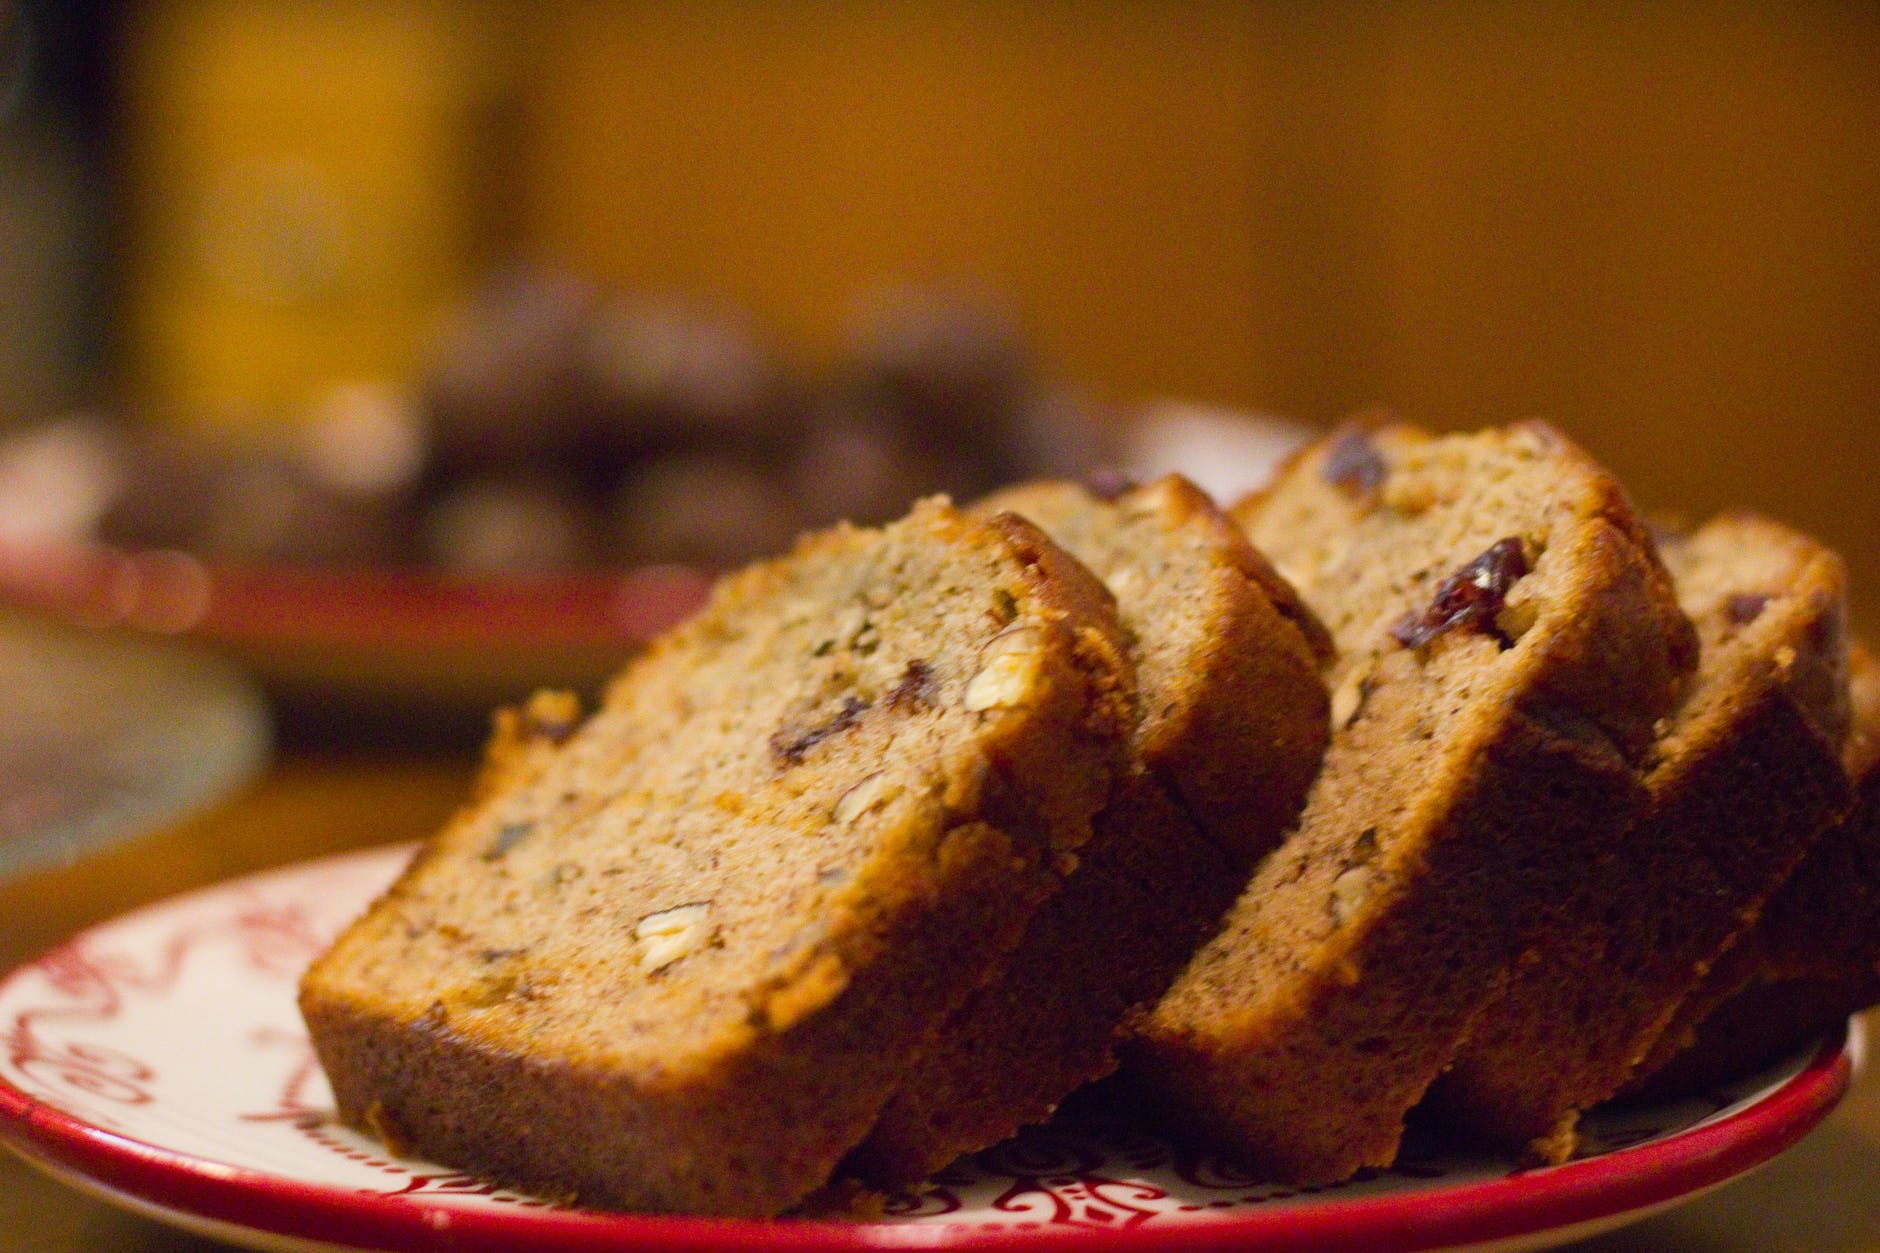 Banana bread = an all-time favorite baked goodie